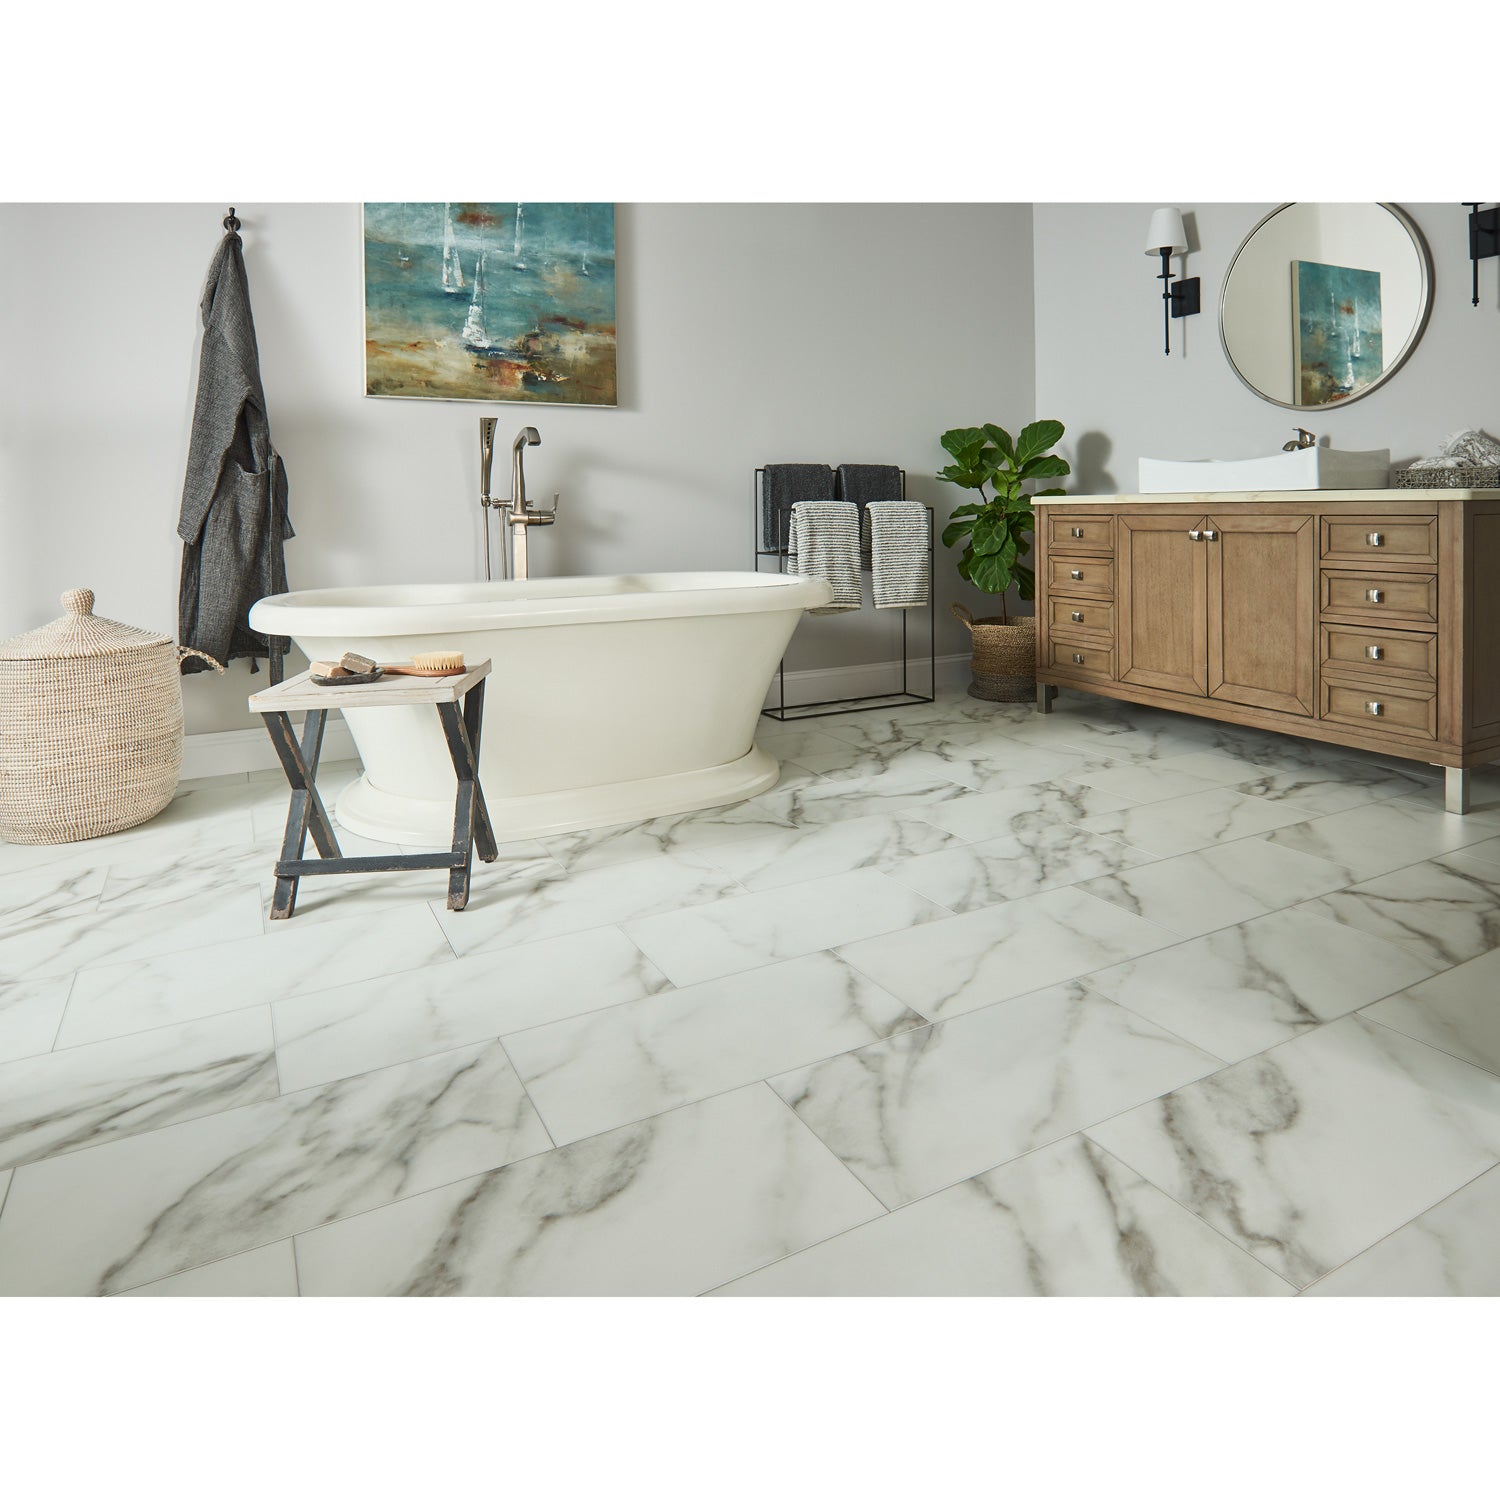 Bruce - Lifeseal Reserve Rigid Core - 12 in. x 24 in. - Marble Winter White